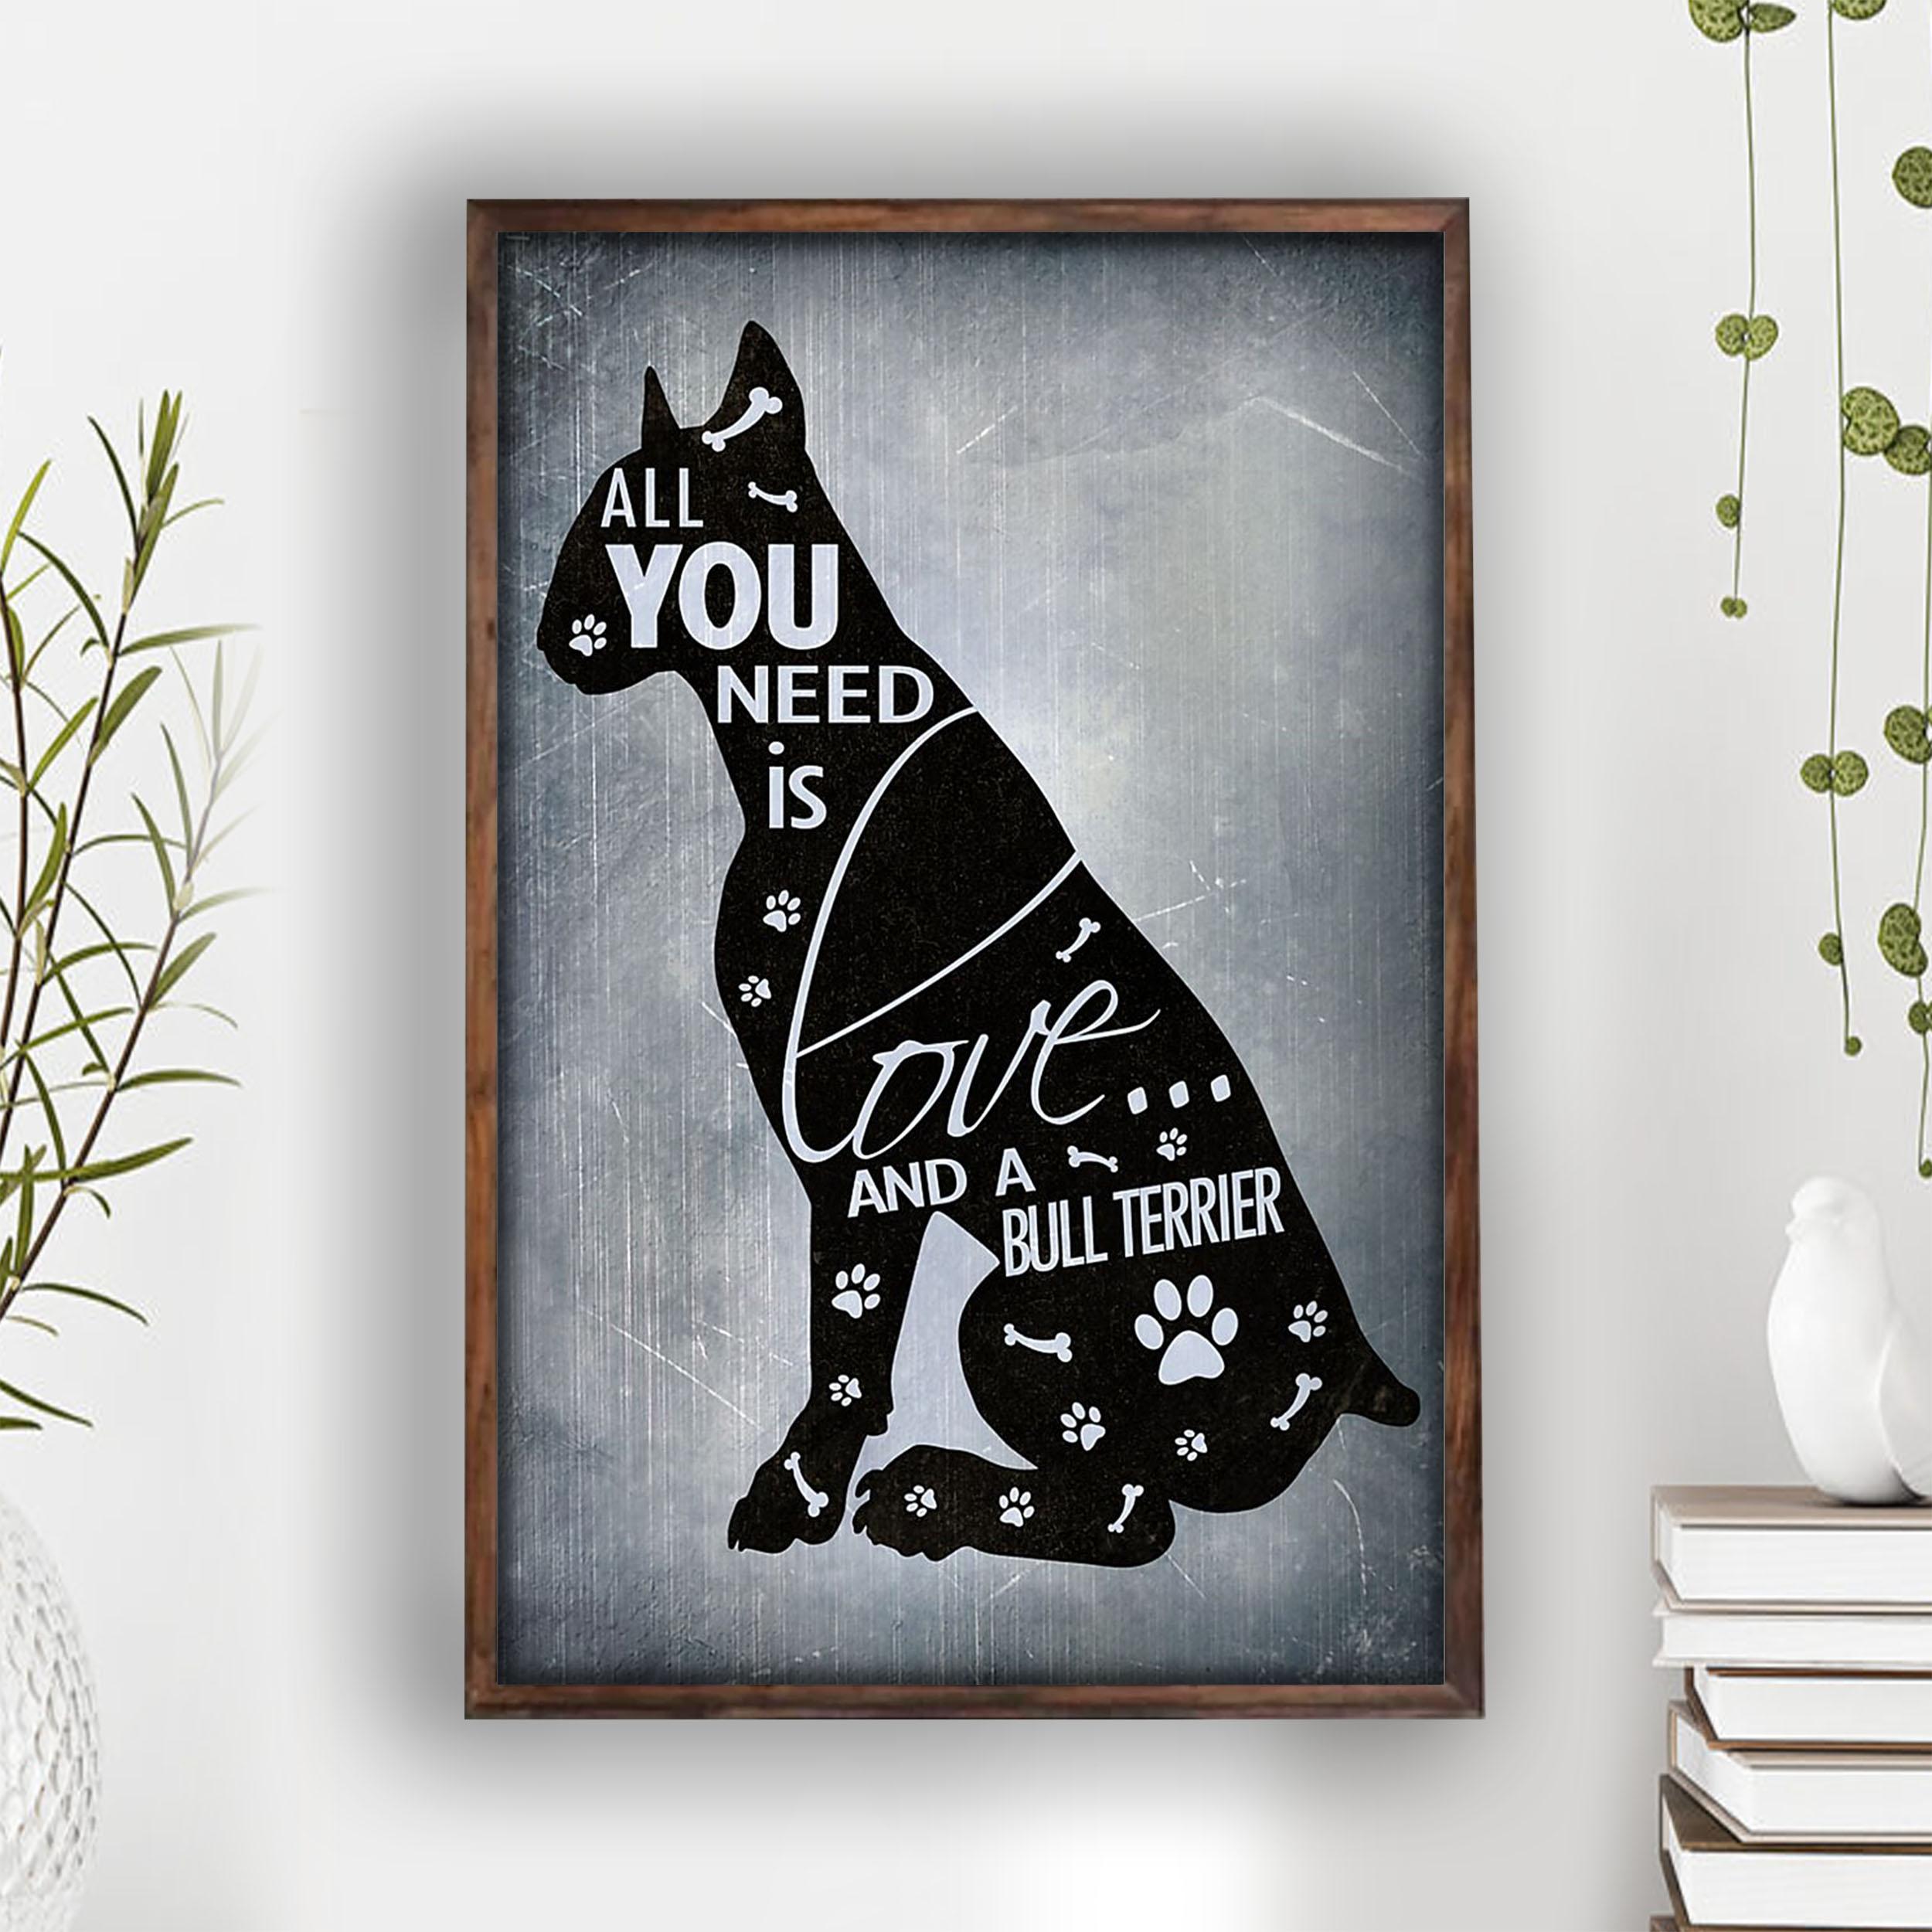 Bull Terrier Poster Bull Terrier Lovers All you Need Is Love Wall Art Home Decor Poster Print